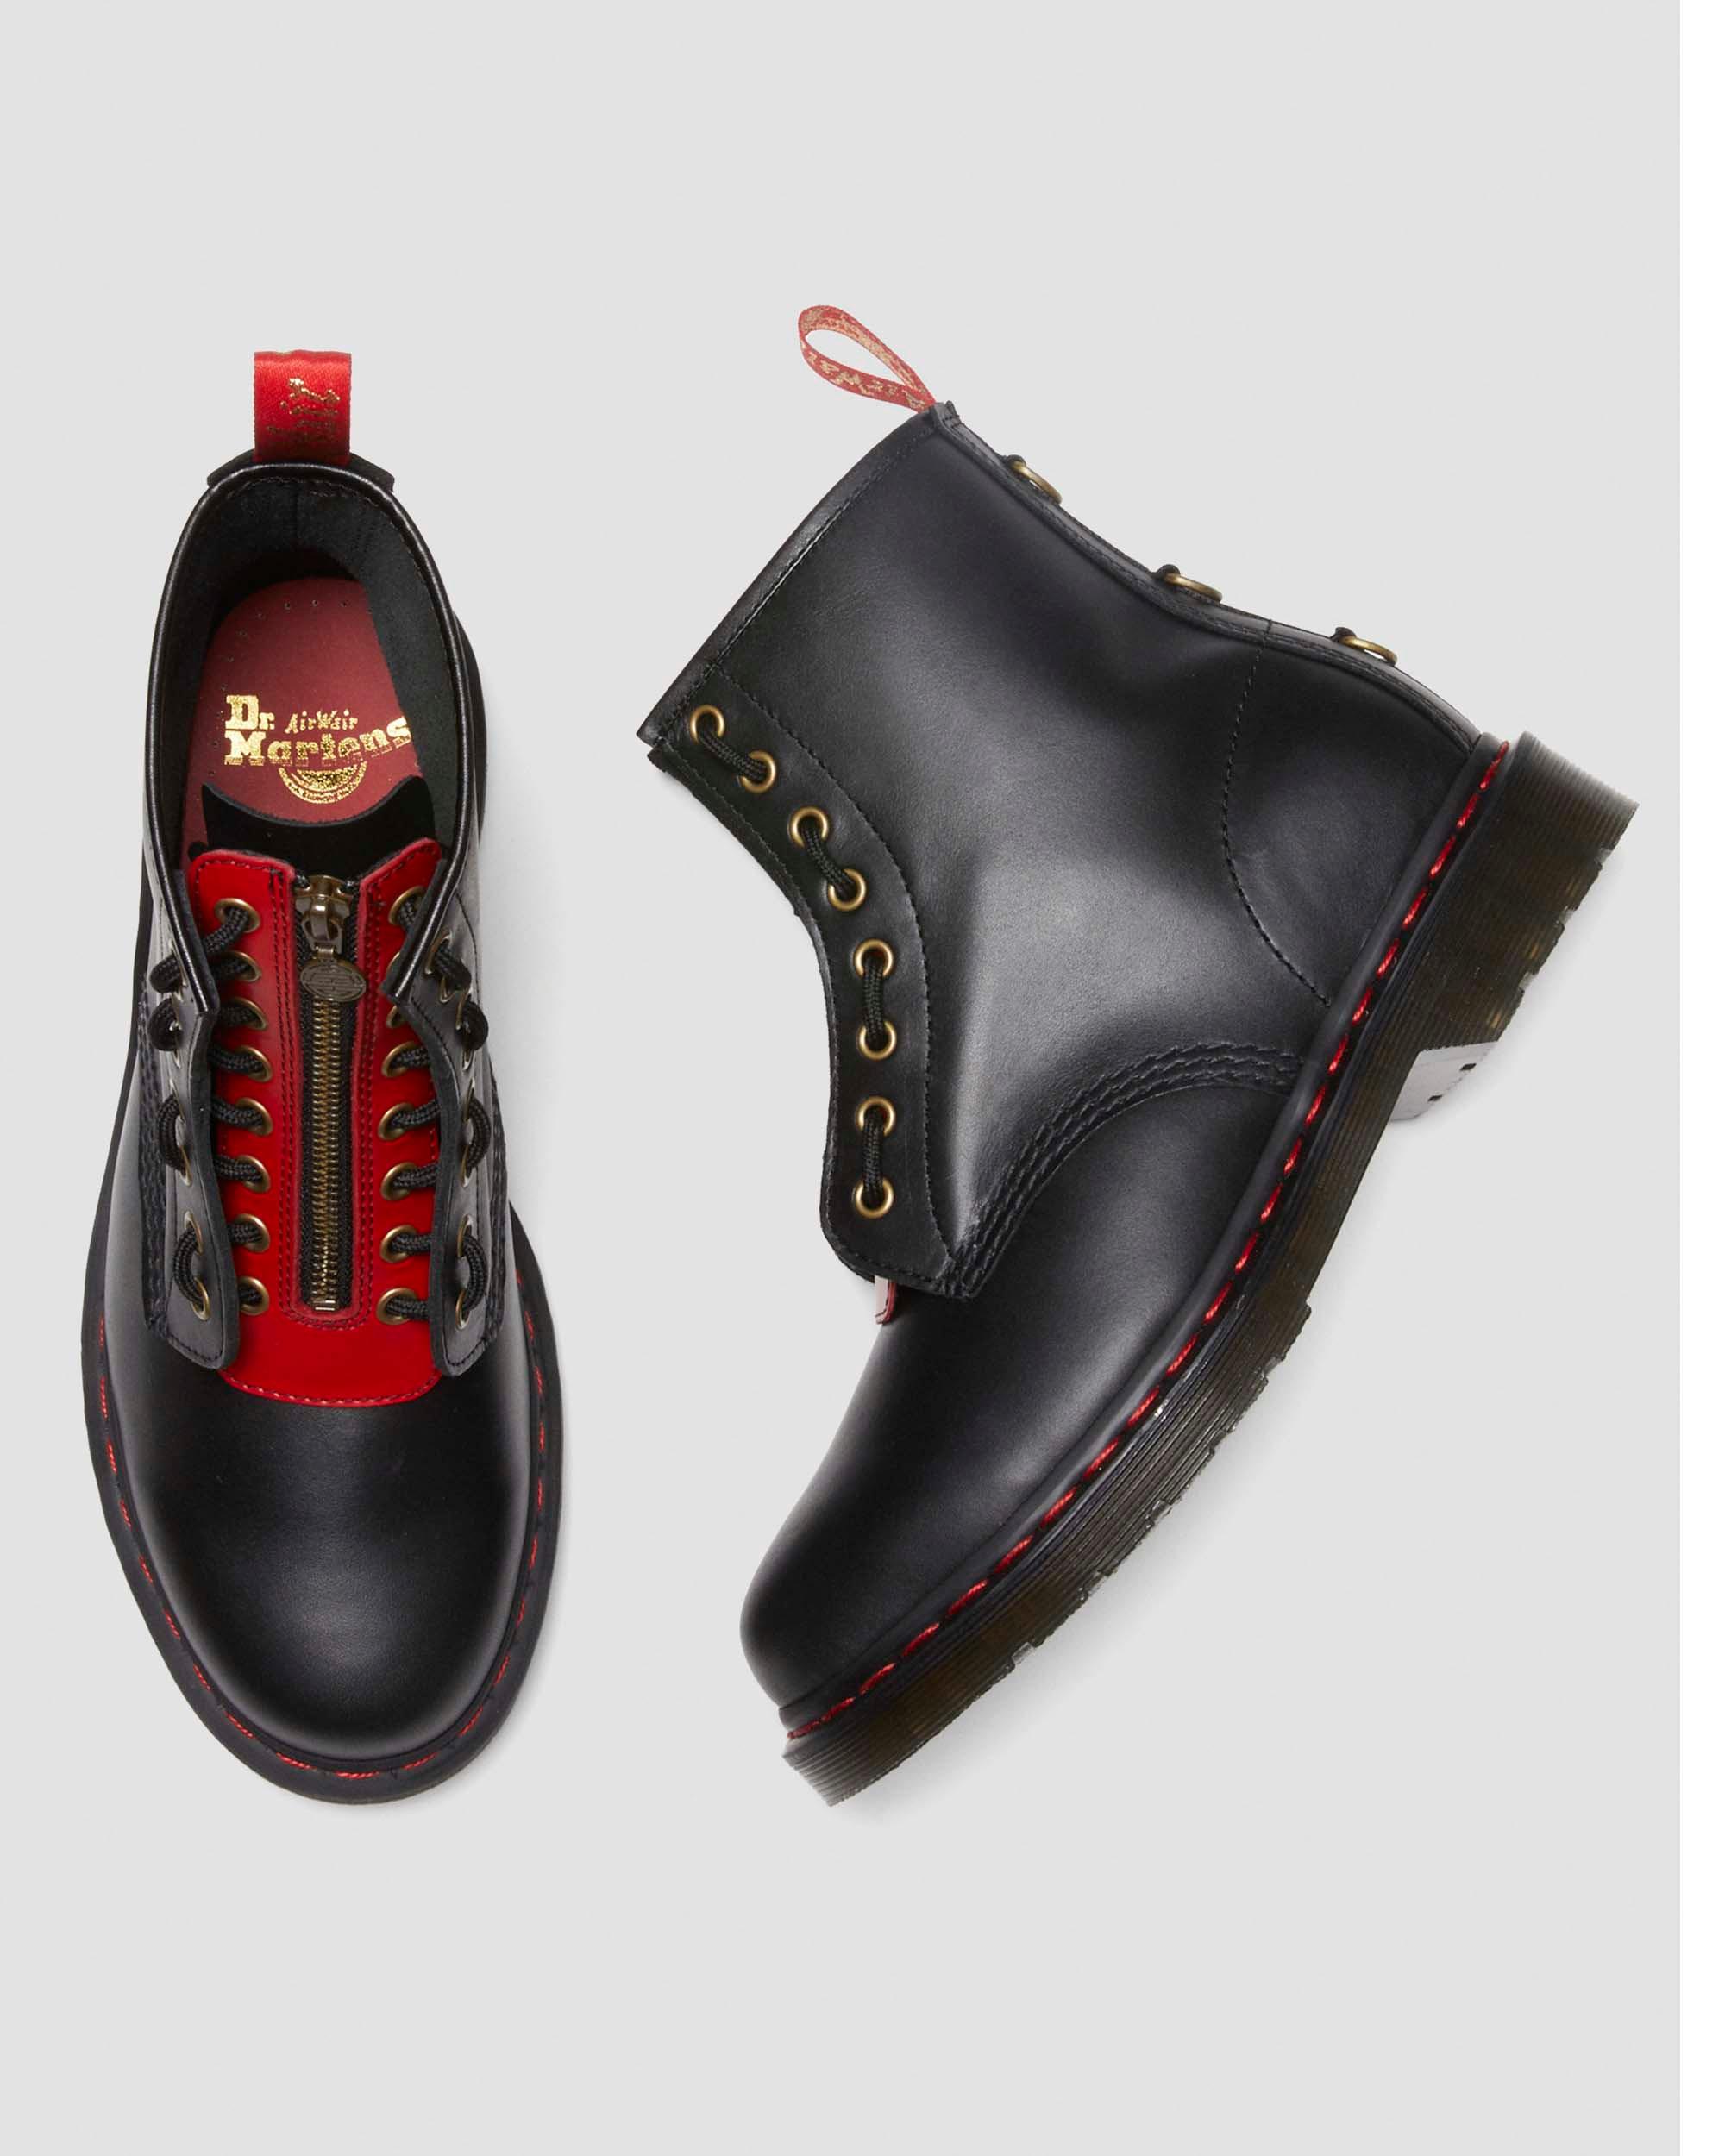 Dr. Martens YEAR OF THE RABBIT UK6-